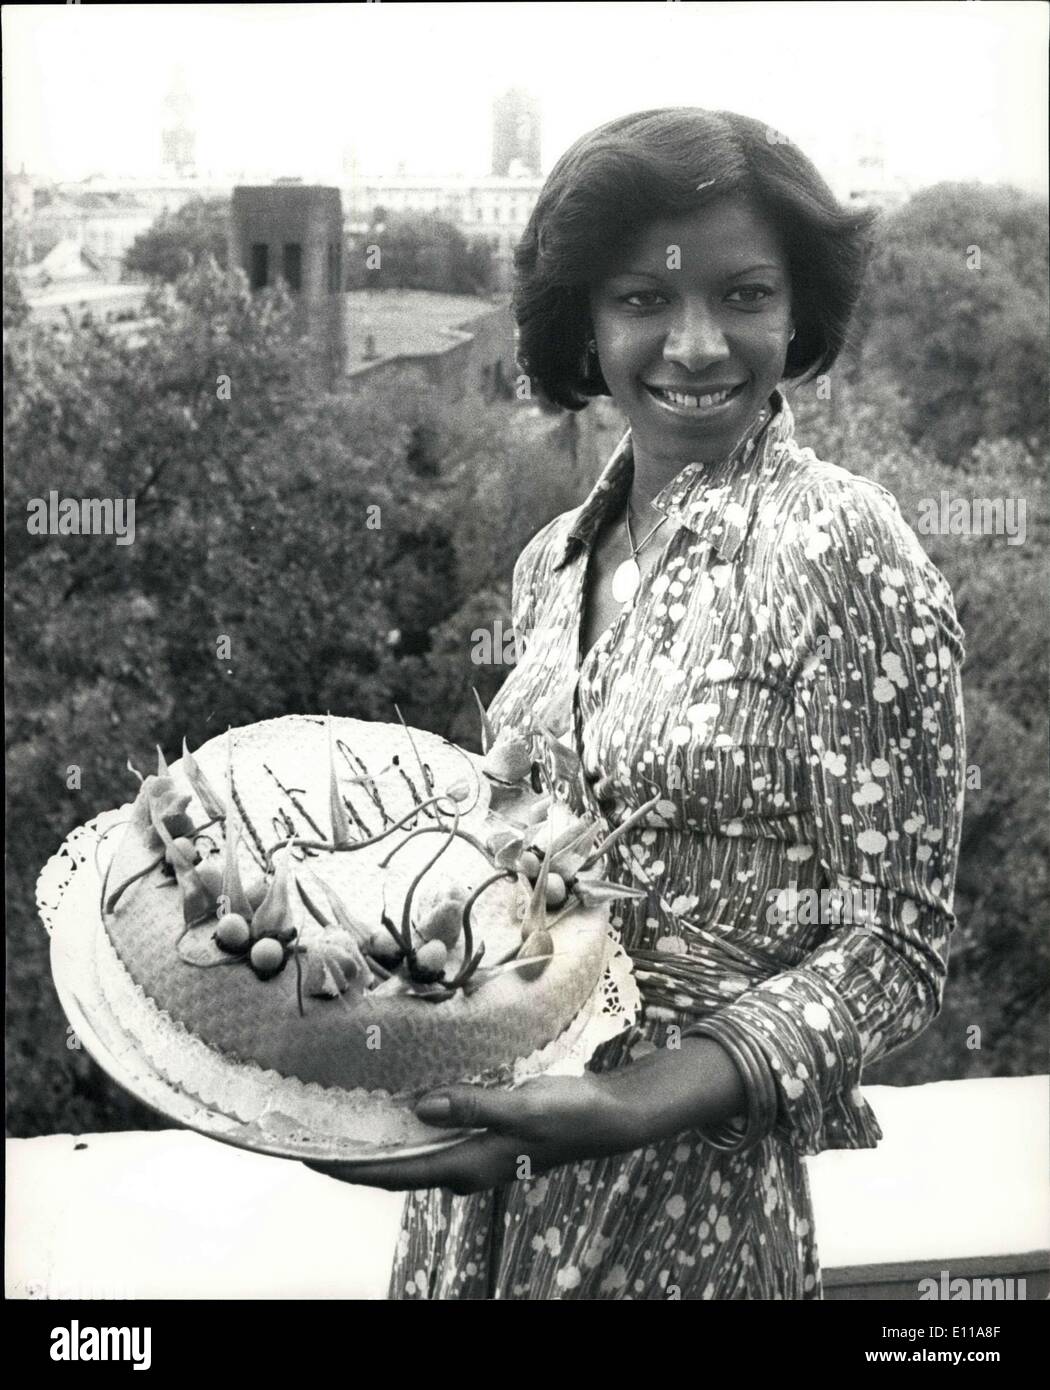 Sep. 29, 1976 - Natalie Cole Here For Her British Concert Debut: Natalie Cole, the 26-year-old singing daughter of the famous Nat King Cole is in London to make her British concert debut. Natalie, winner of two Grammies at the 1976 Awards presentations, including Best New Artist of the Year, recently completed a highly successful tour of Japan, which included a prize-winning appearance at the Tokyo Music Festival. She will make her first concert appearance at the New Victoria Theatre in London on Thursday September 30th Stock Photo